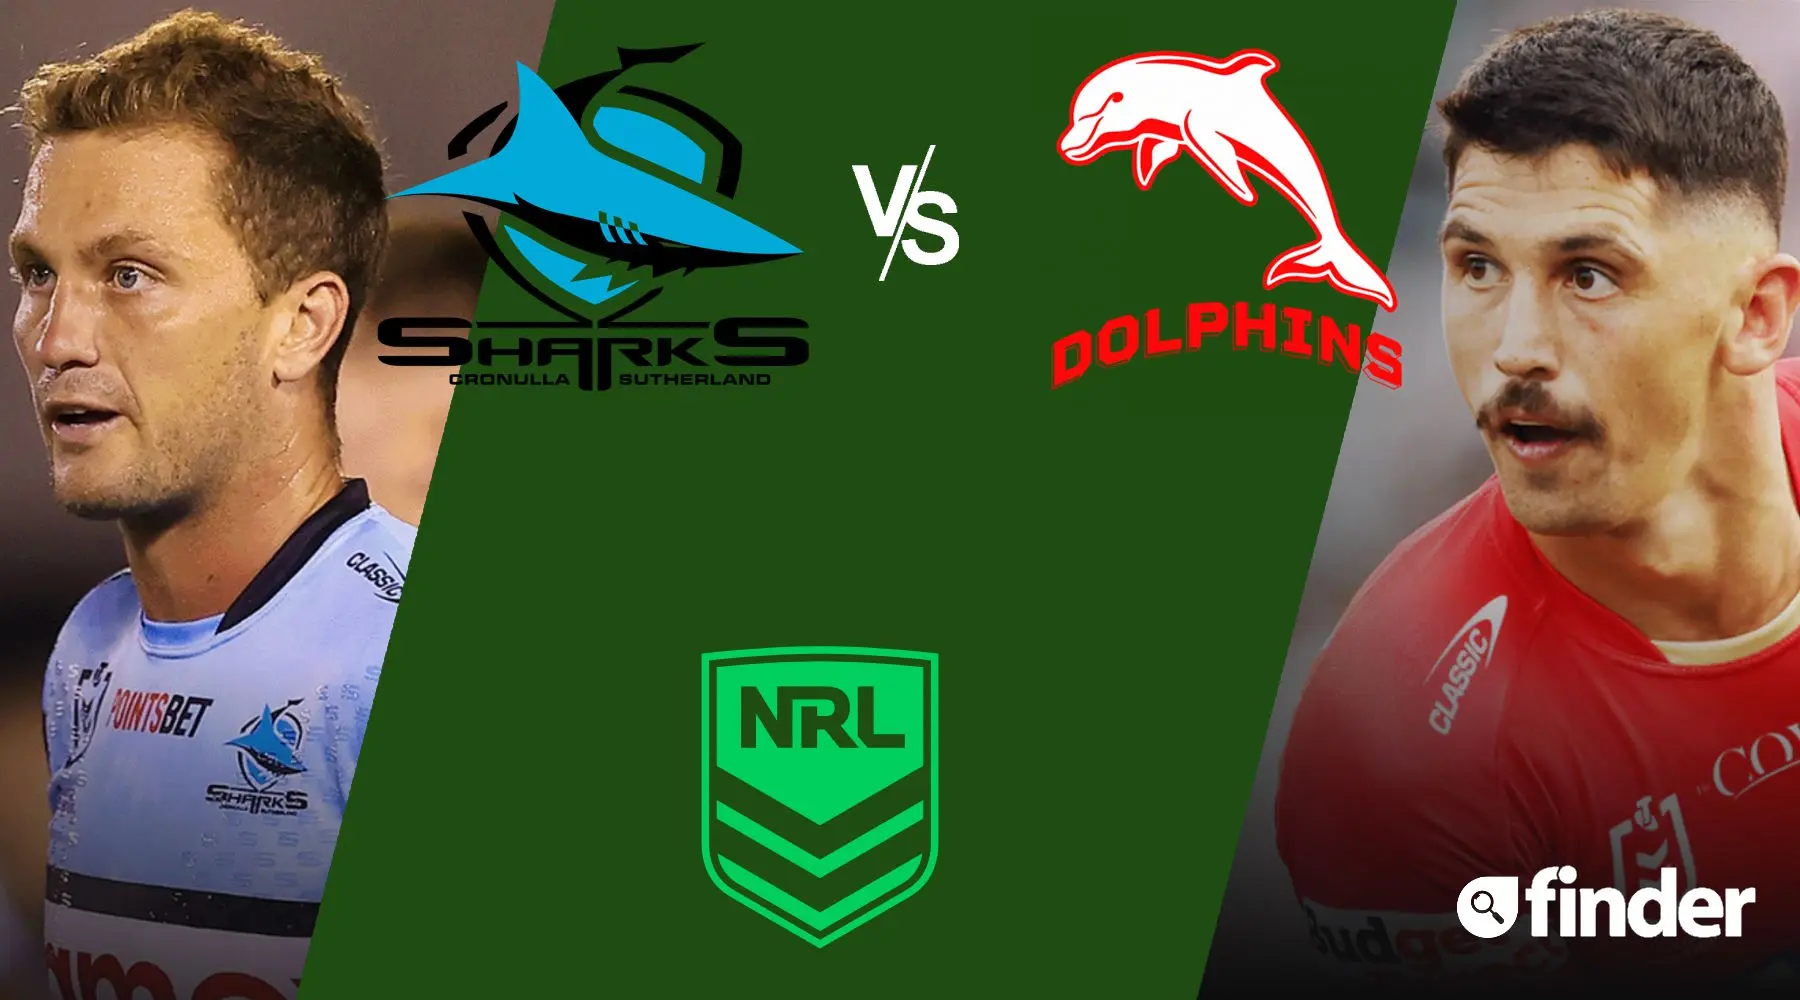 How to watch Sharks vs Dolphins NRL live, match preview, kick-off time